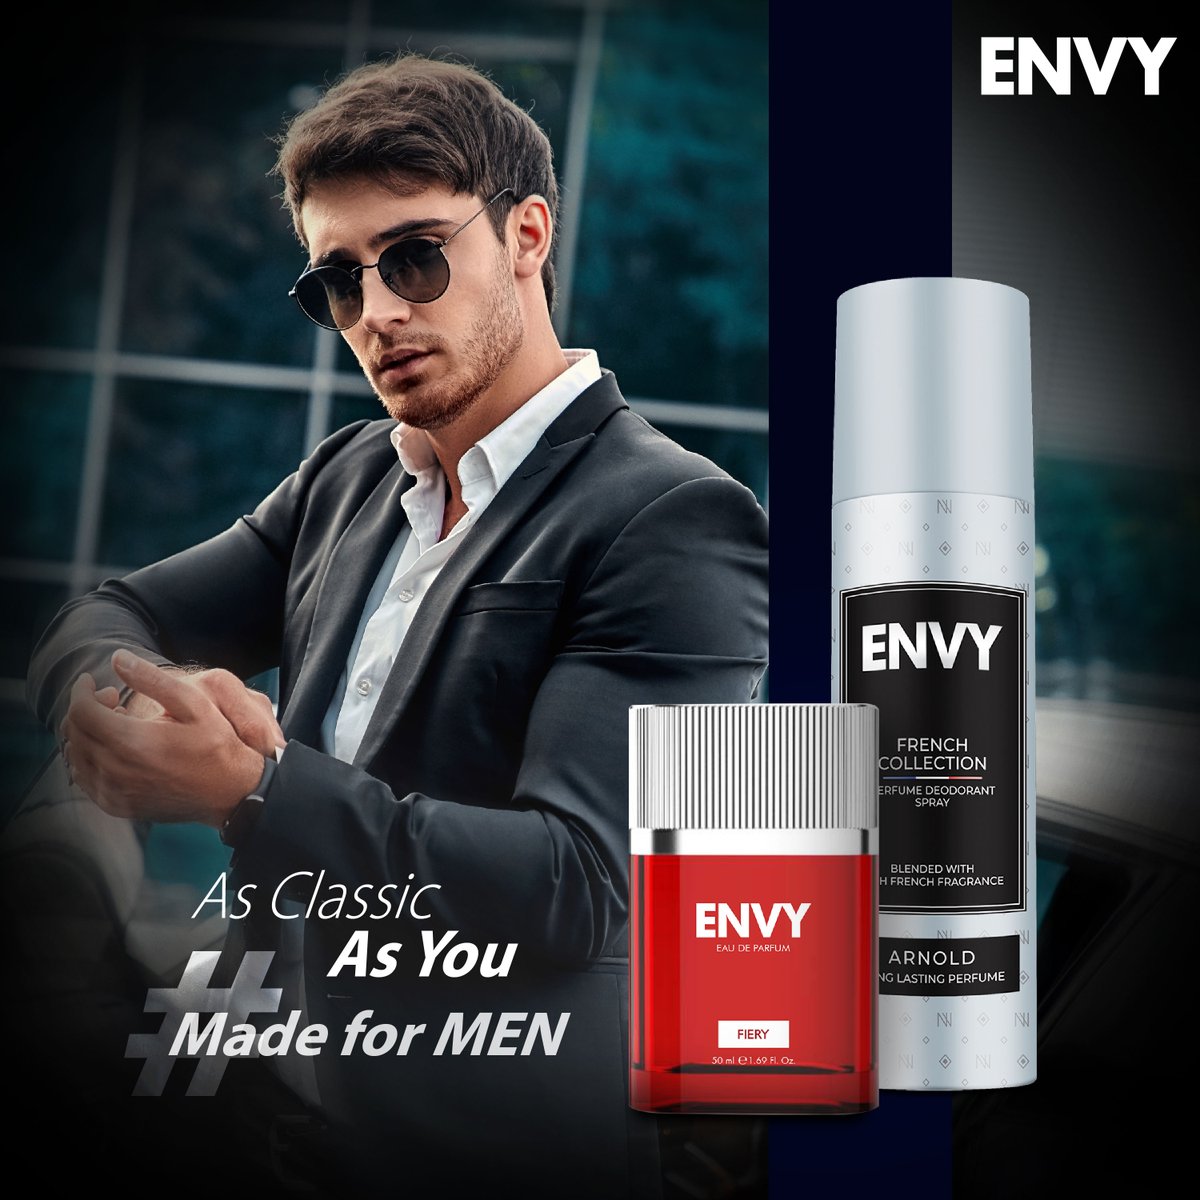 Embrace the irresistible you and let the world fall under your spell. . . Get Your Envy: envyfragrances.com . . #madeformen #envyfrench #frenchperfume #perfumes #masculinefragrance #menstyling #fashion #menfragrance #menperfume #frenchcollection #frenchperfume #french